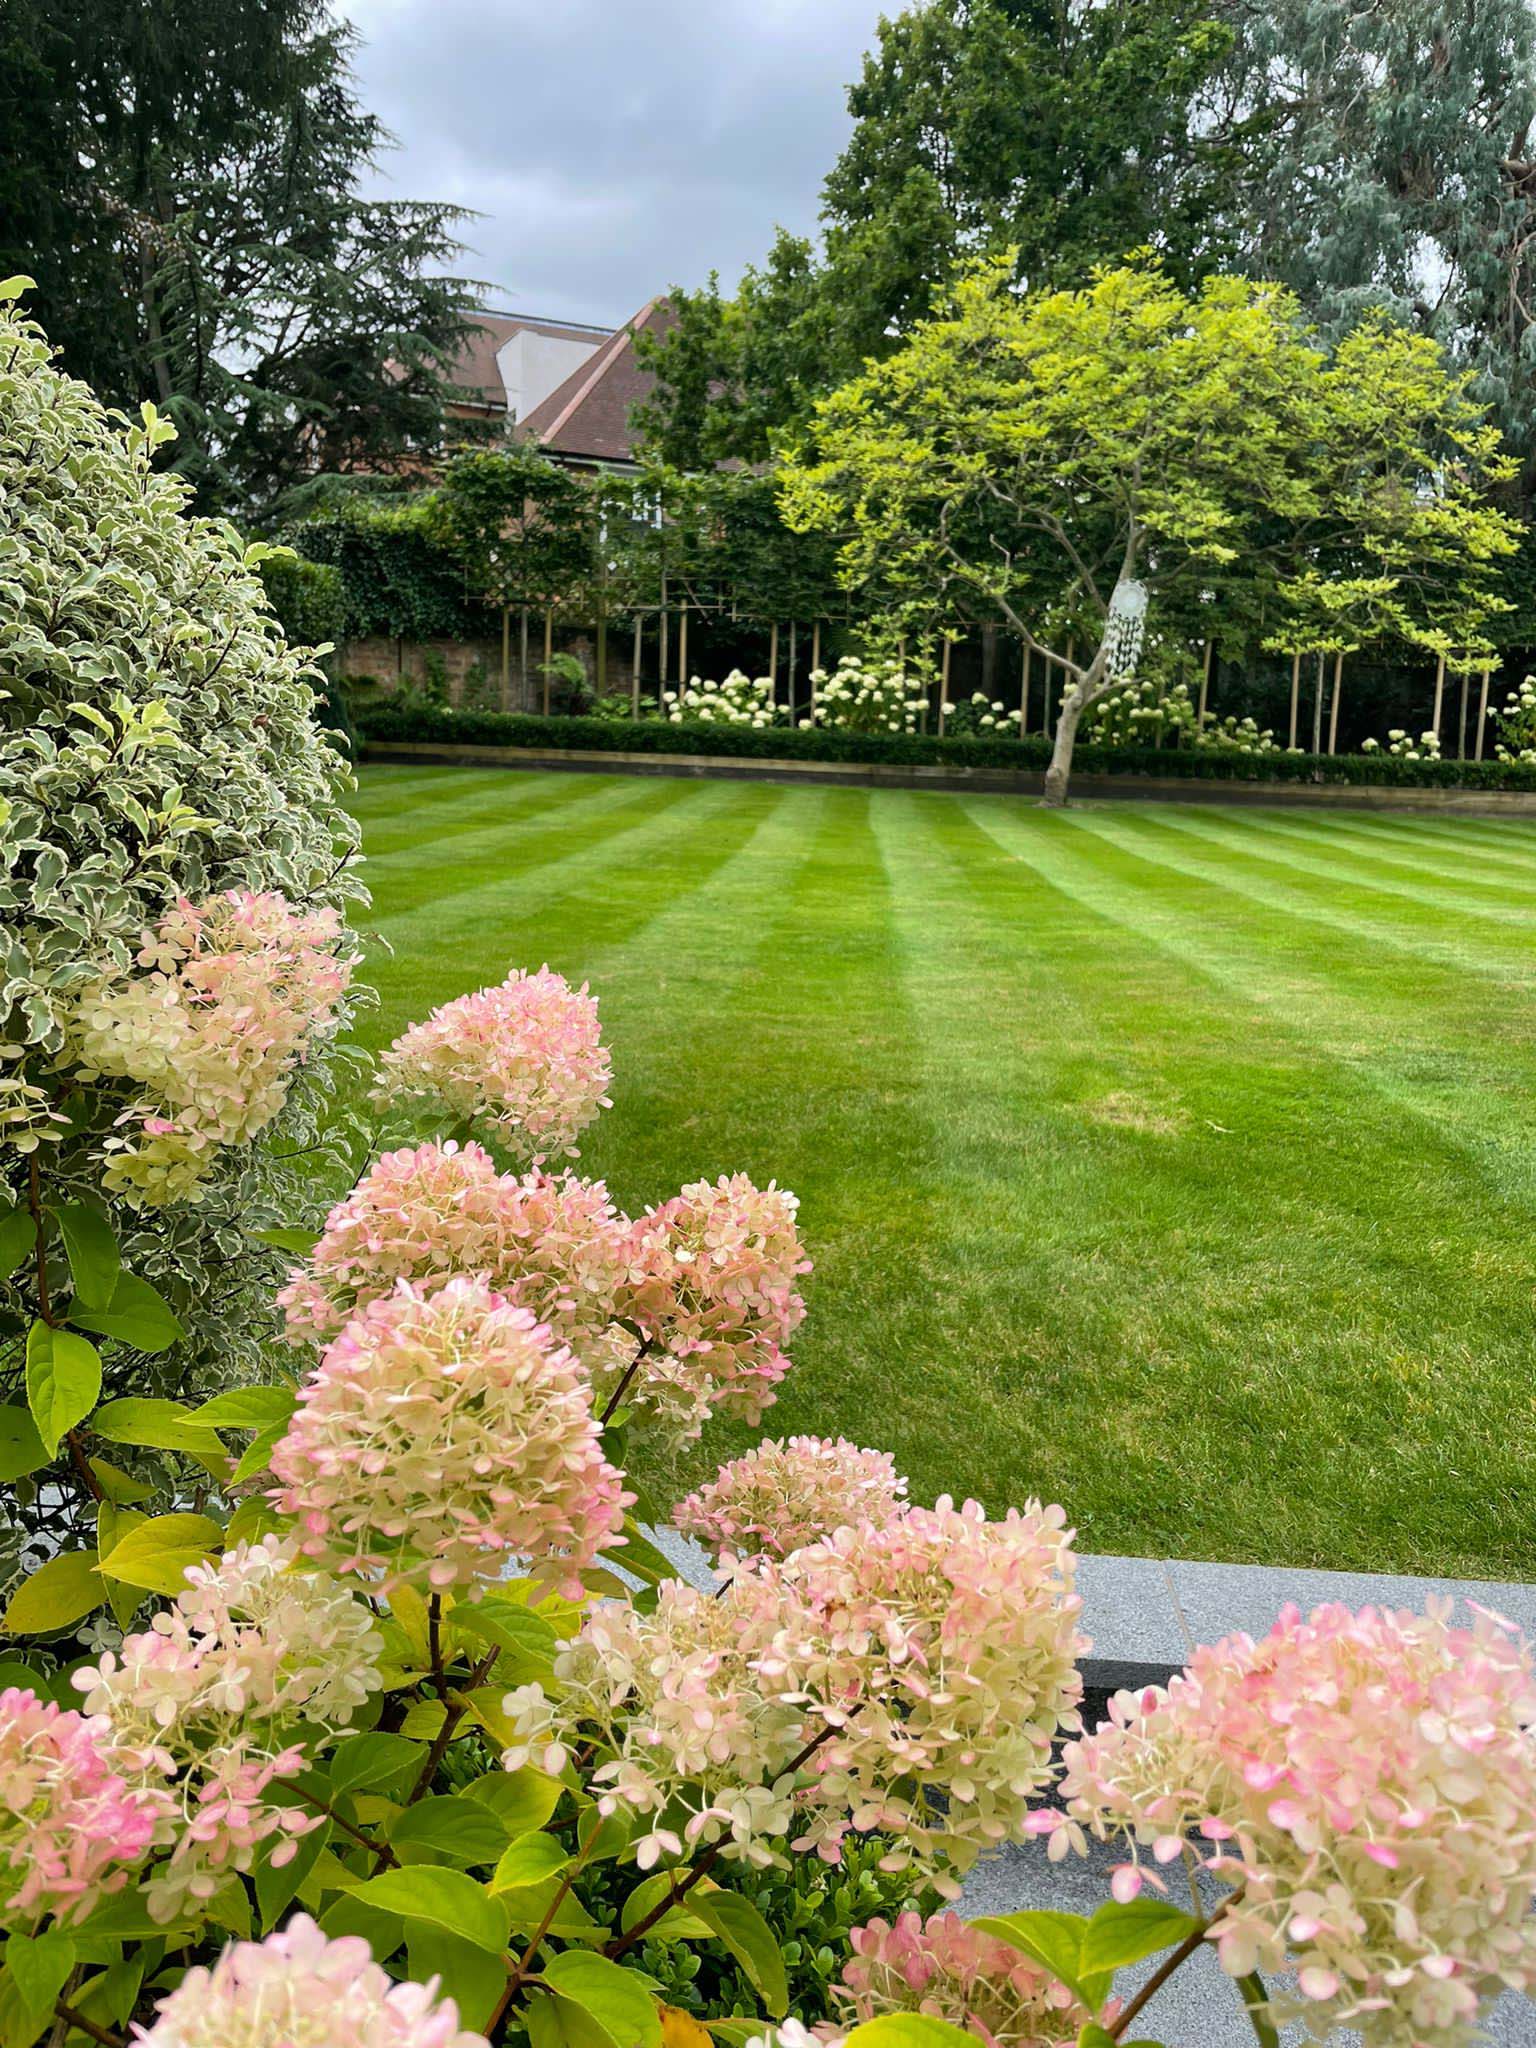 A ground level photo of a well mown lawn